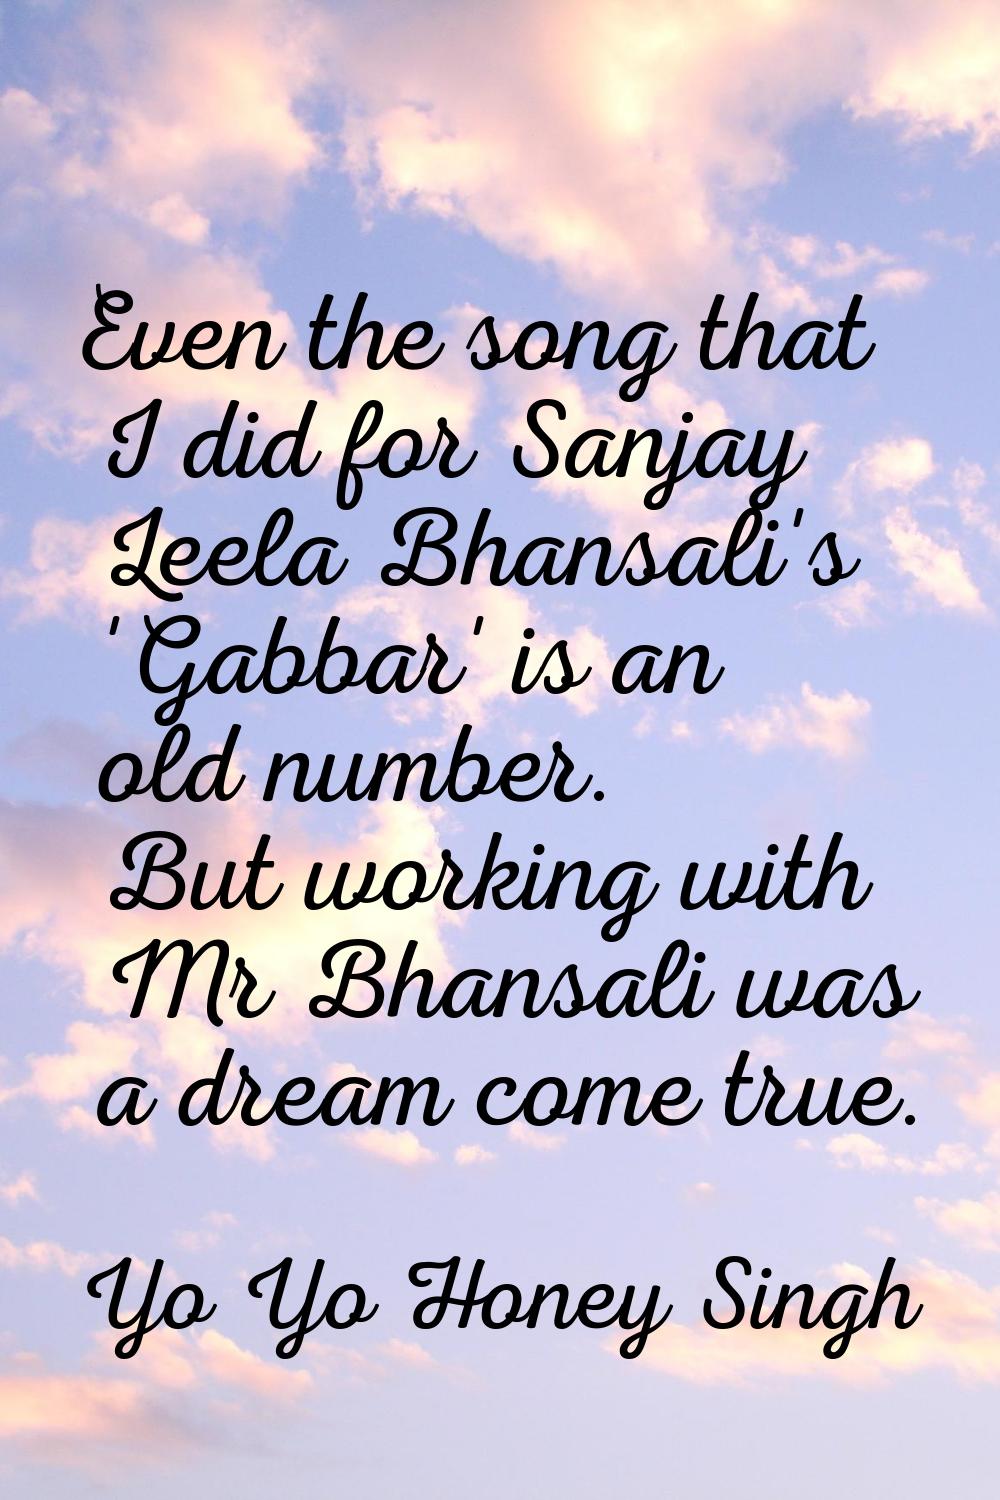 Even the song that I did for Sanjay Leela Bhansali's 'Gabbar' is an old number. But working with Mr